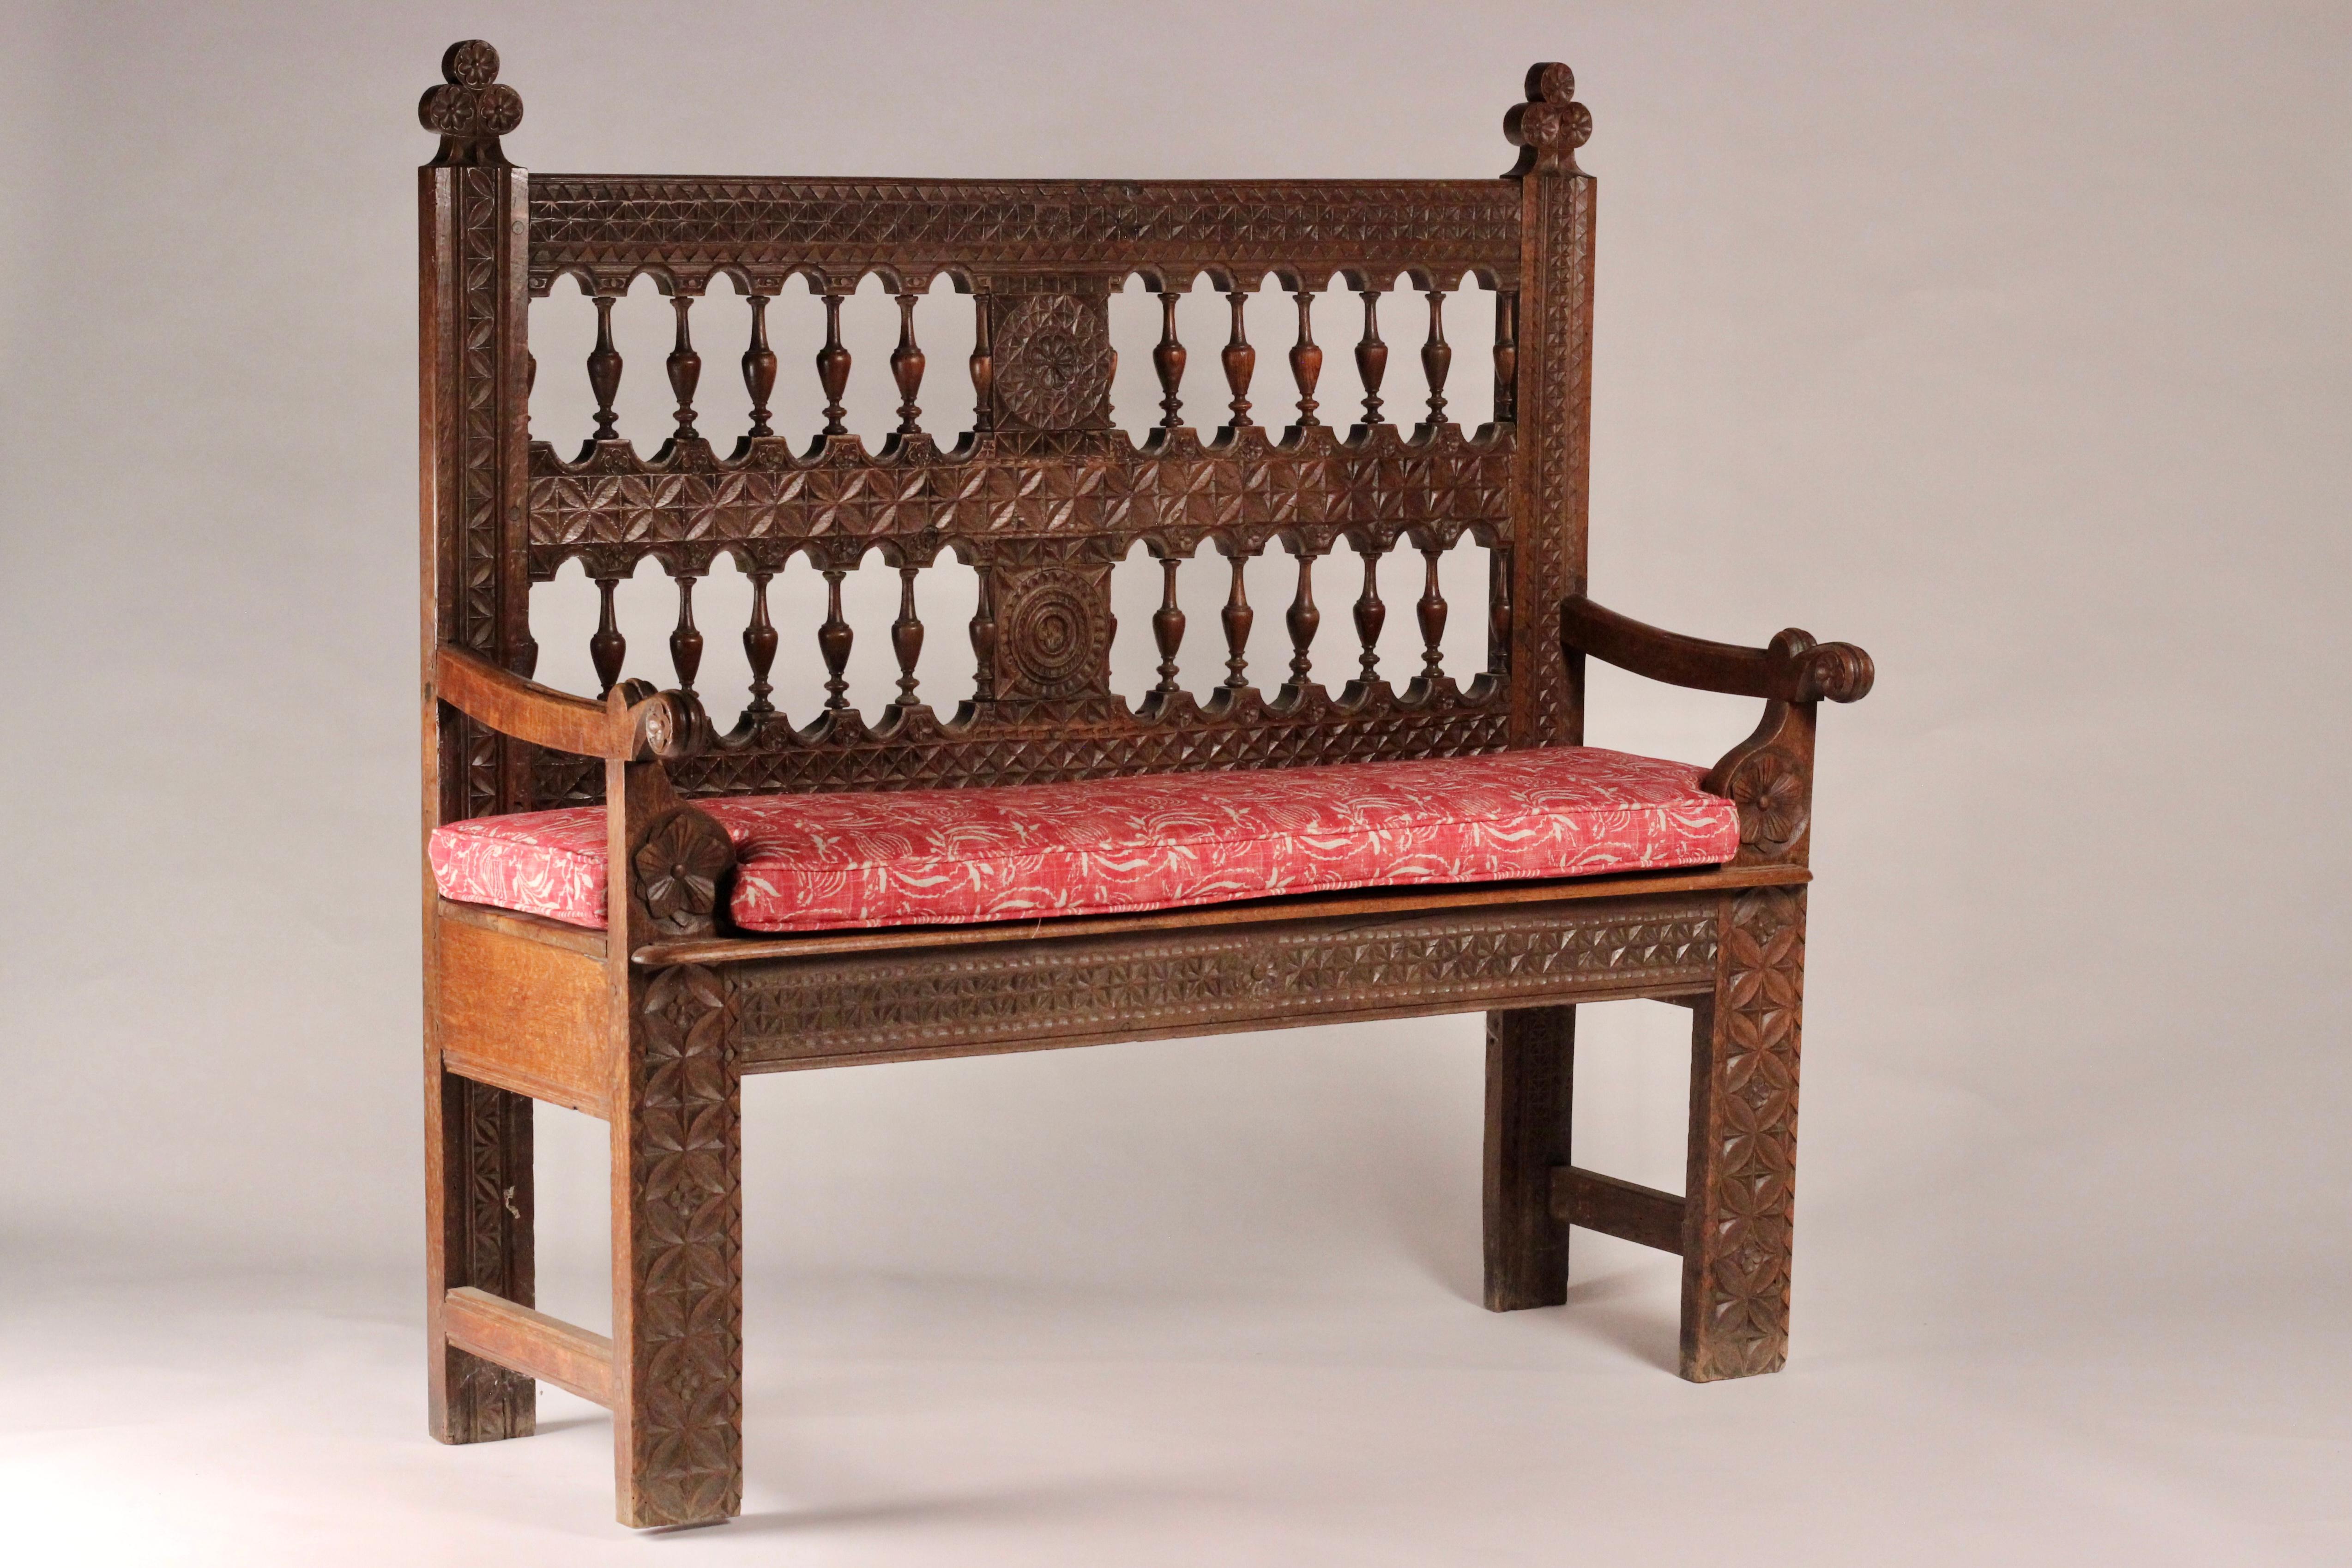 A hand carved and crafted oak 19th century French Gothic Revival bench or settle with an upholstered cushion or pillow. 

Ornately and intricately carved, displaying many of the typical motifs of the time of panels of Rosettes, flowers and foliage.